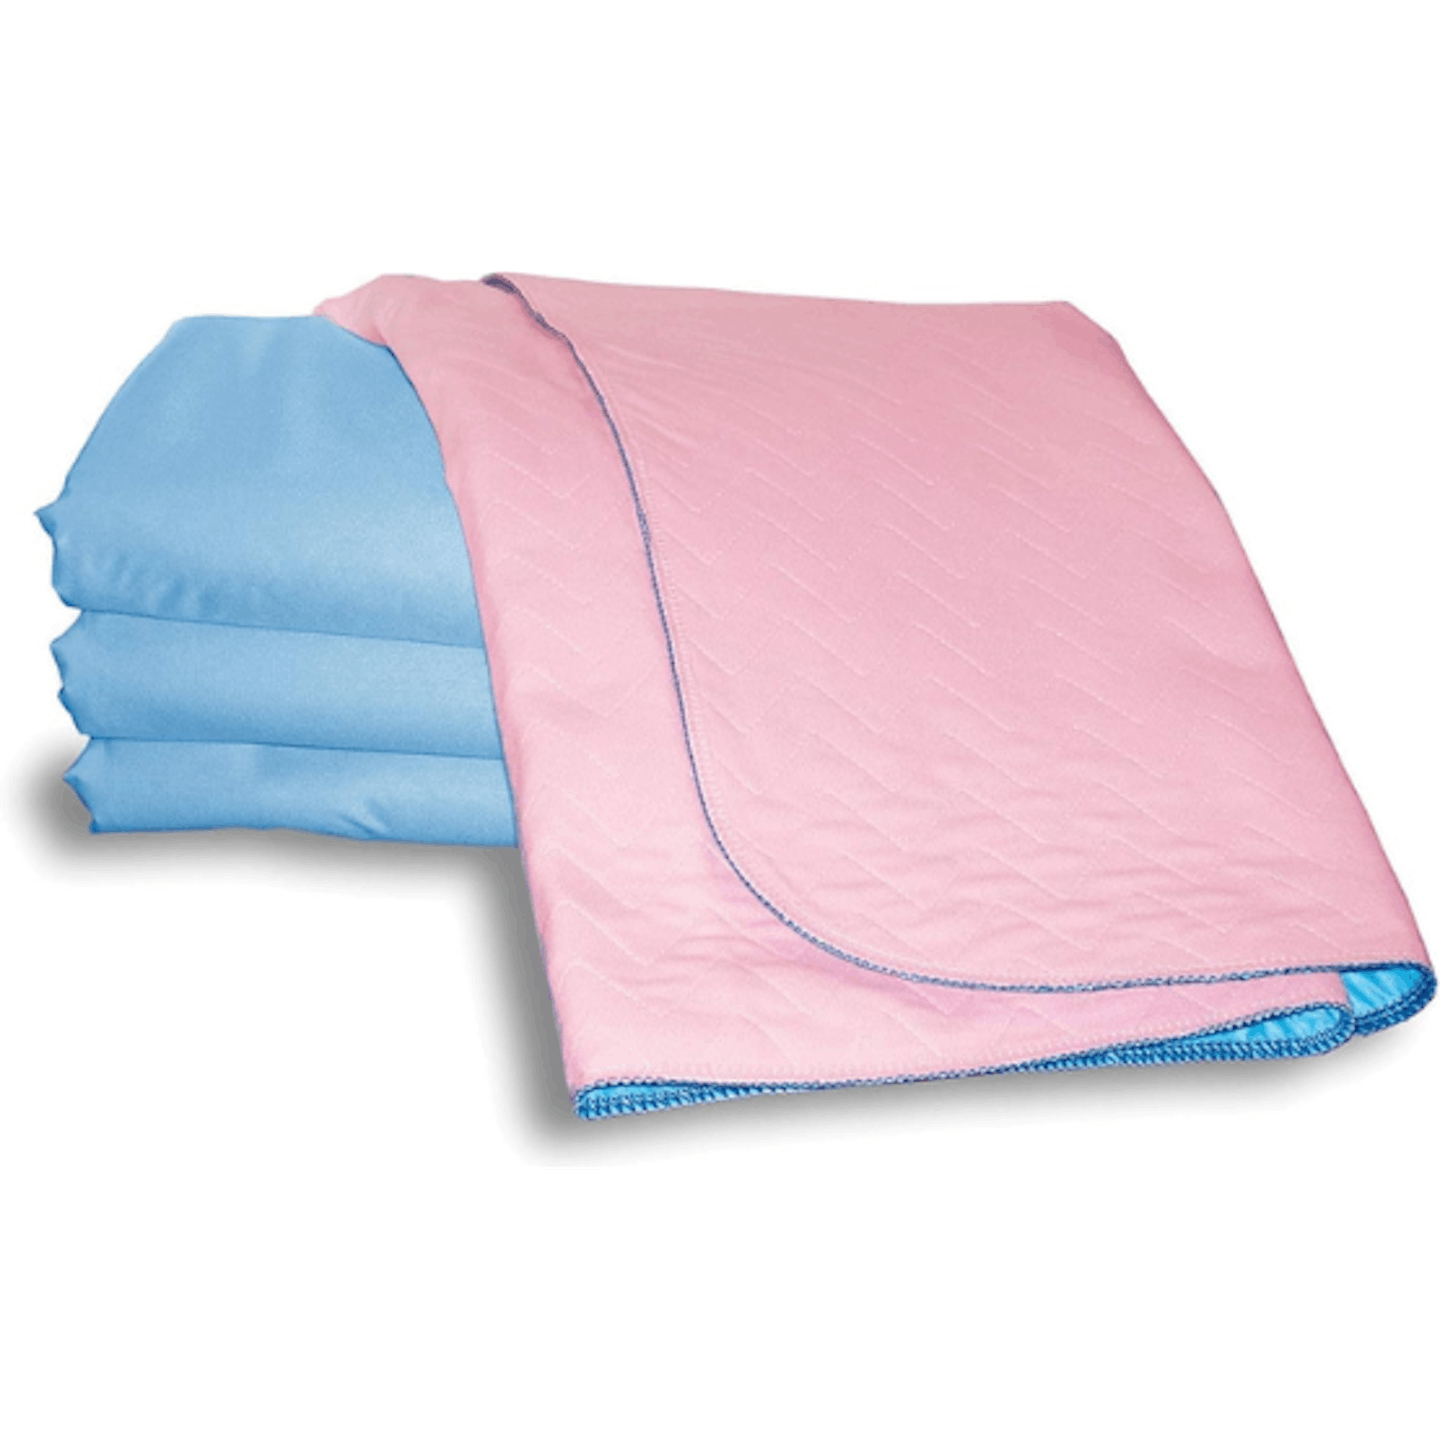 Reusable bed wetting pads